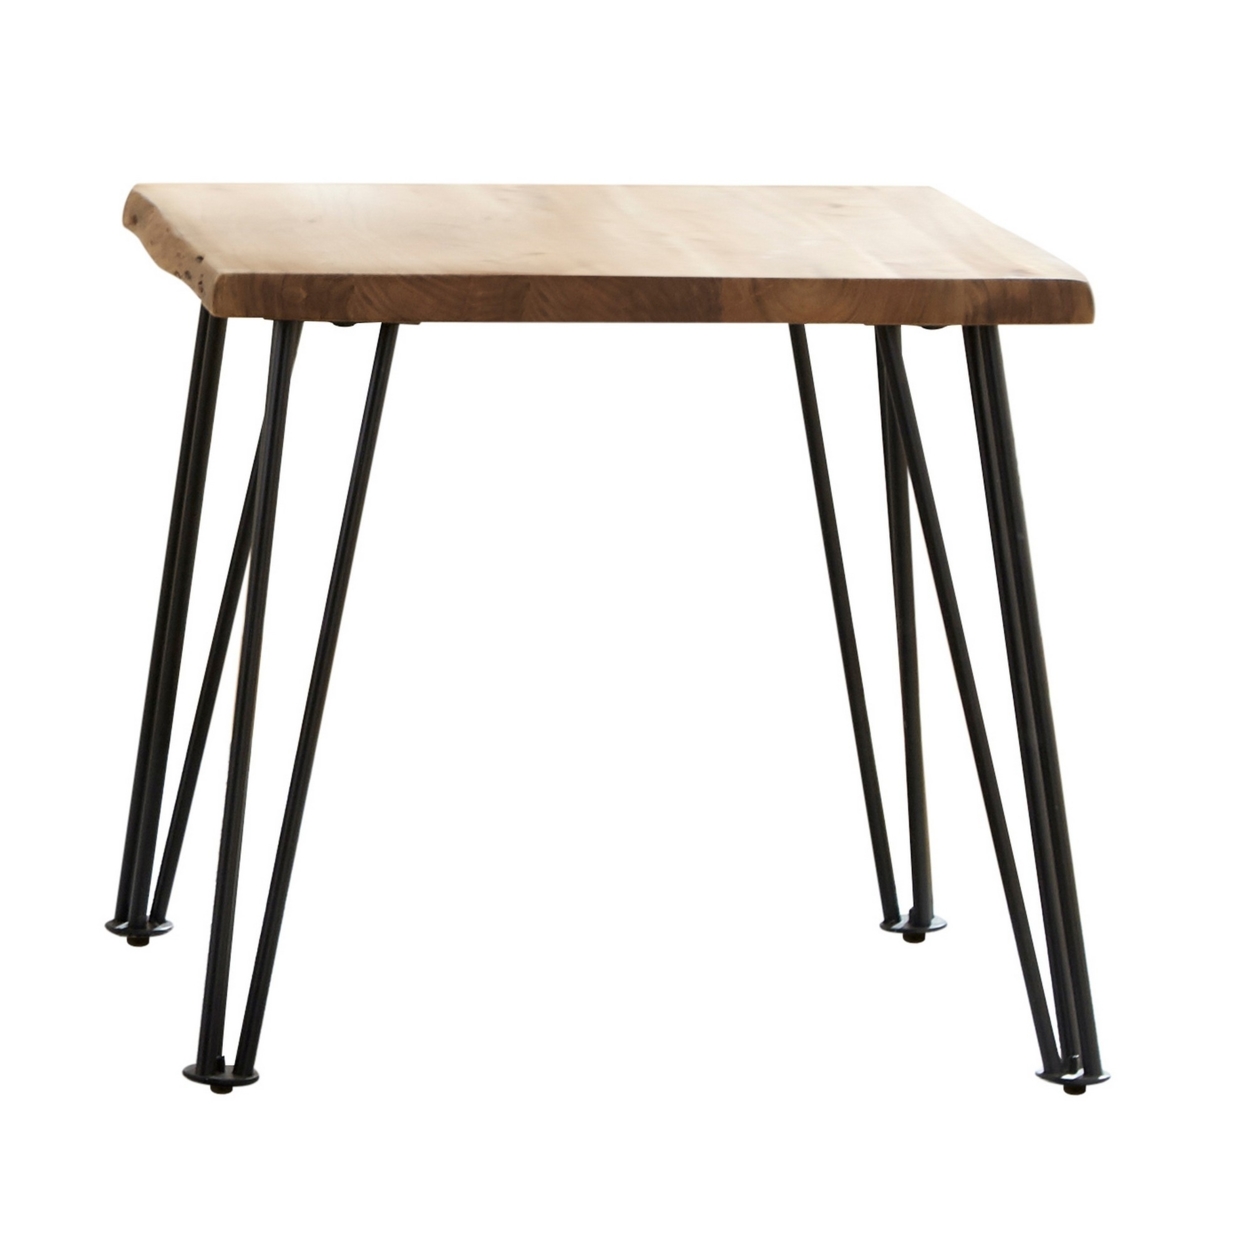 End Table With Square Top And Hairpin Legs, Brown And Black- Saltoro Sherpi